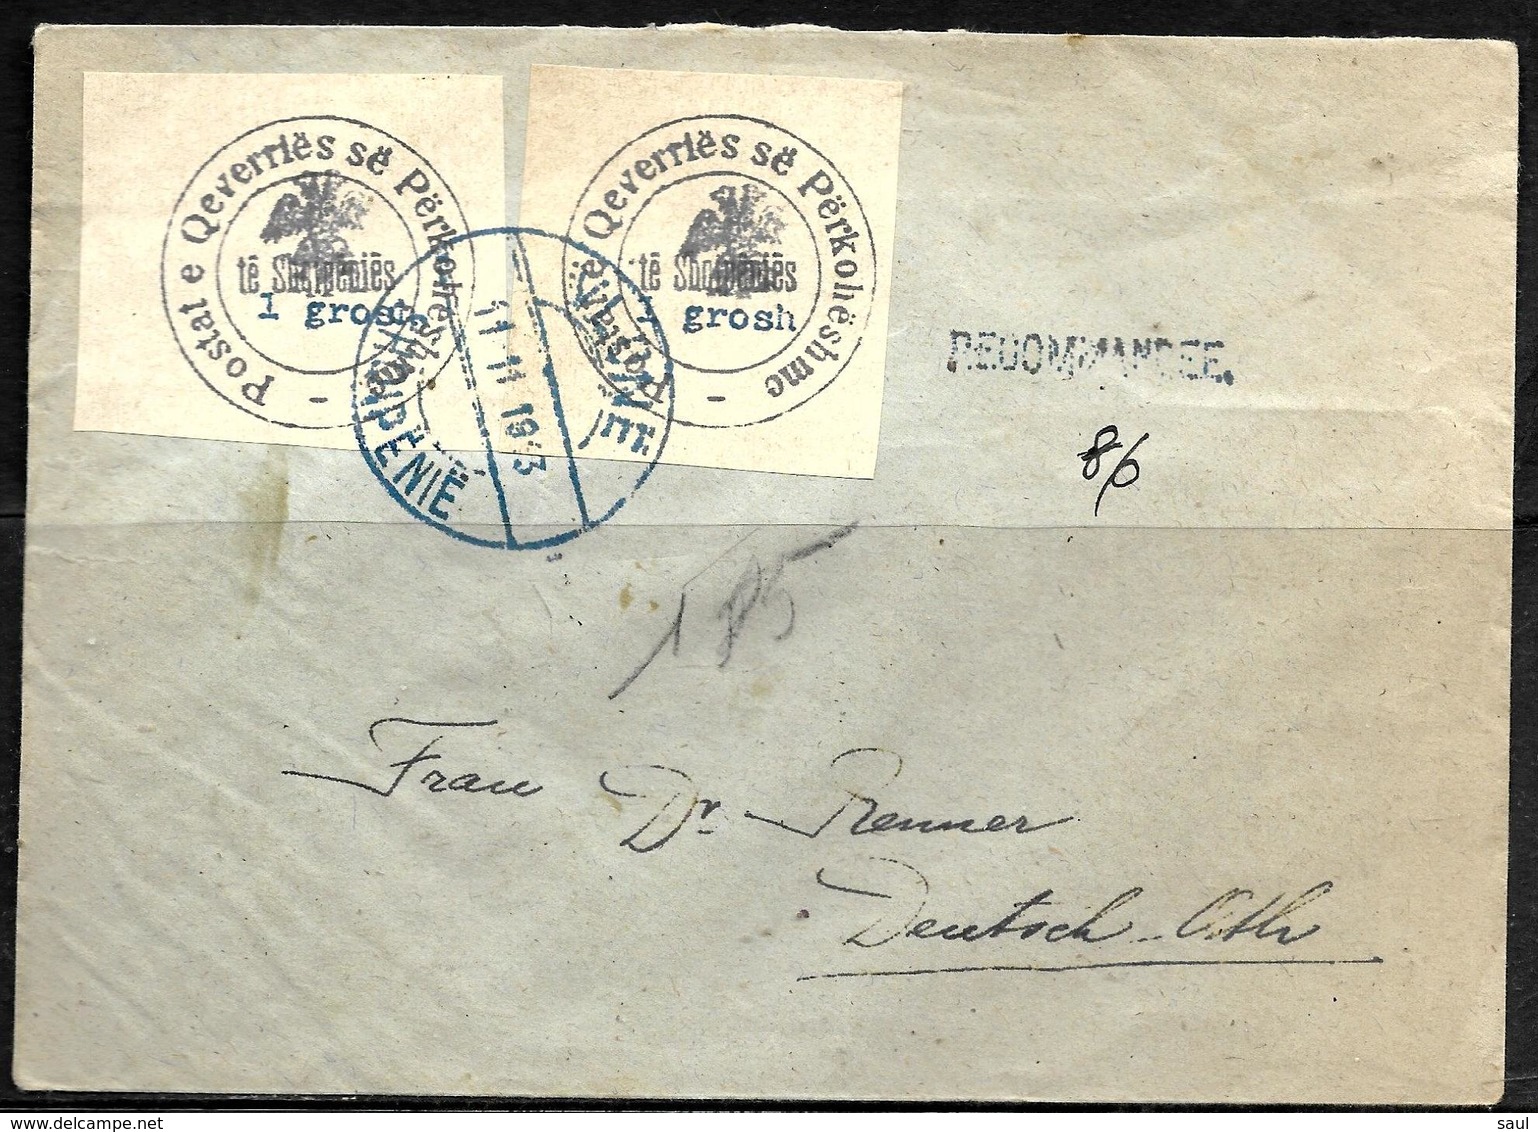 625 - ALBANIA - 1913 - REVOLUTIONARY ISSUES - COVER - FORGERY, FALSE, FAKE, FAUX, FALSO, FALSCH - Unclassified